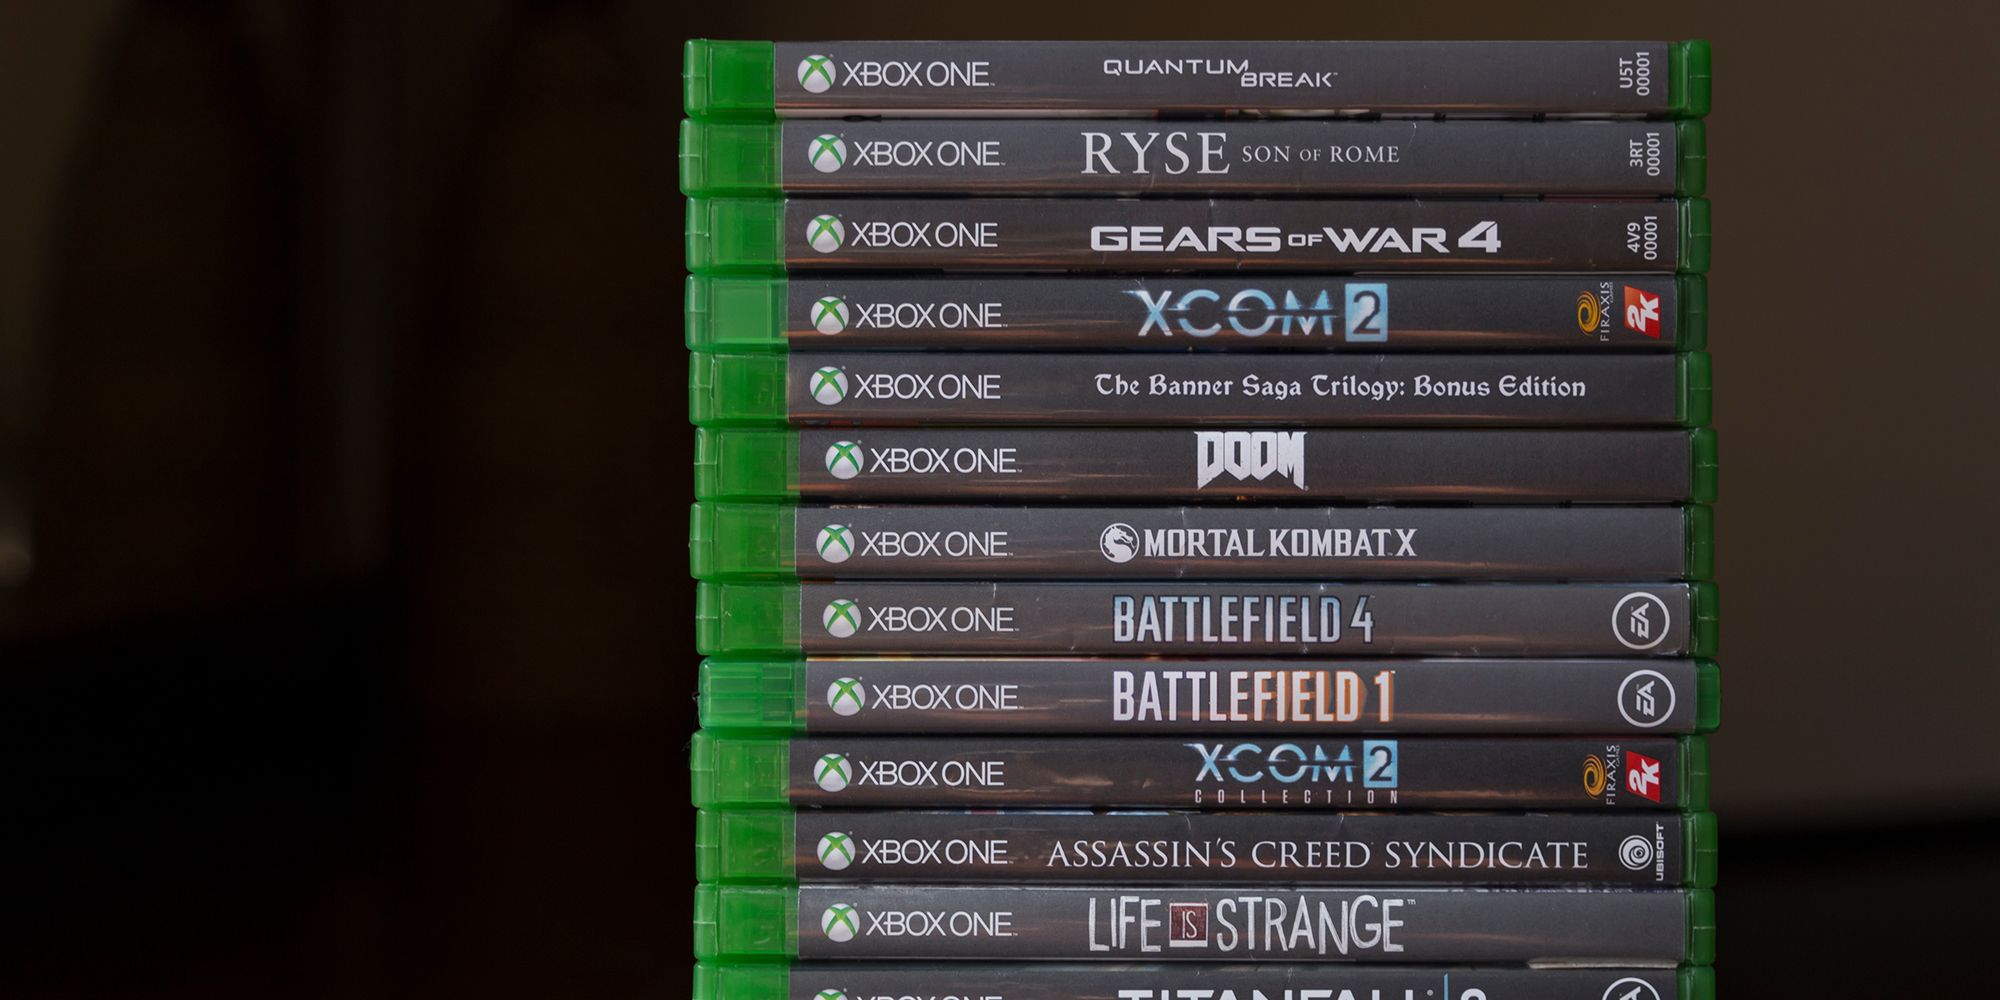 Stack of Xbox One games. From top to bottom: Quantum Break, Ryyse, Gears of War 4, XCOM 2, The Banner Saga Trilogy, DOOM, Mortal Kombat X, Battlefield 4, Battlefield 1, XCOM 2 Collection, Assassin's Creed Syndicate, Life is Strange, Titanfall 2